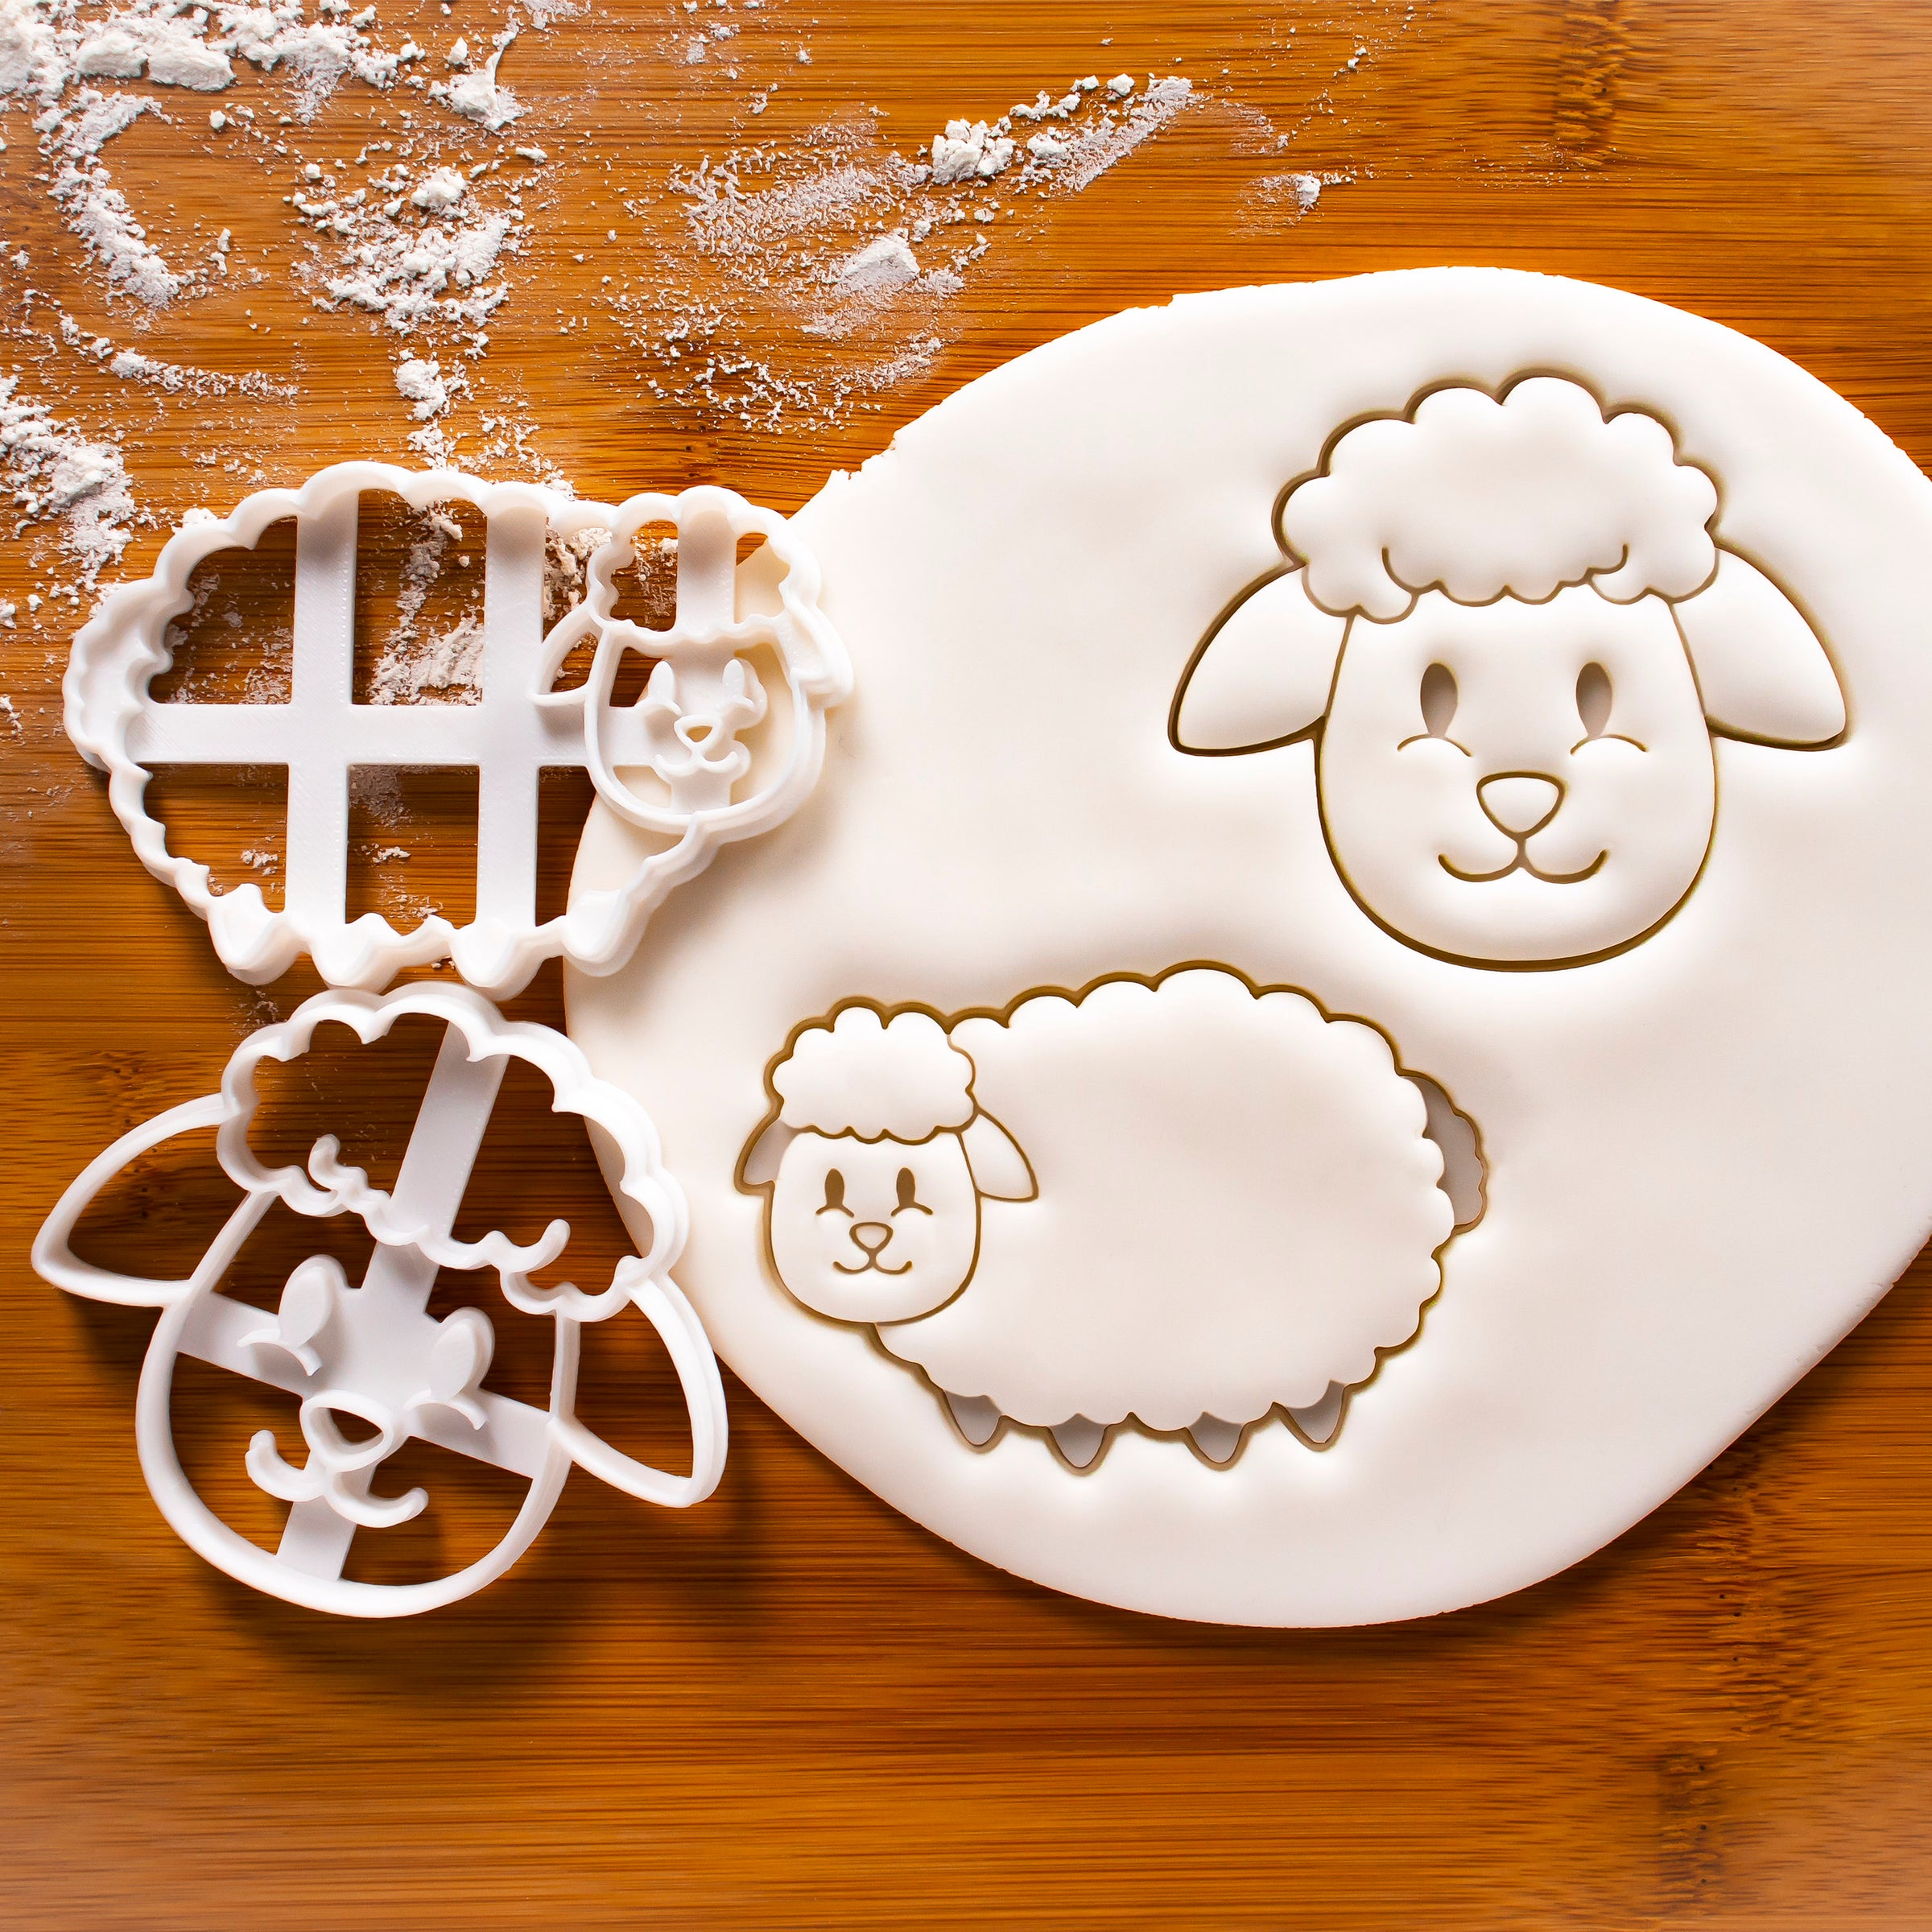 Set of 2 Sheep cookie cutters - Face and Body